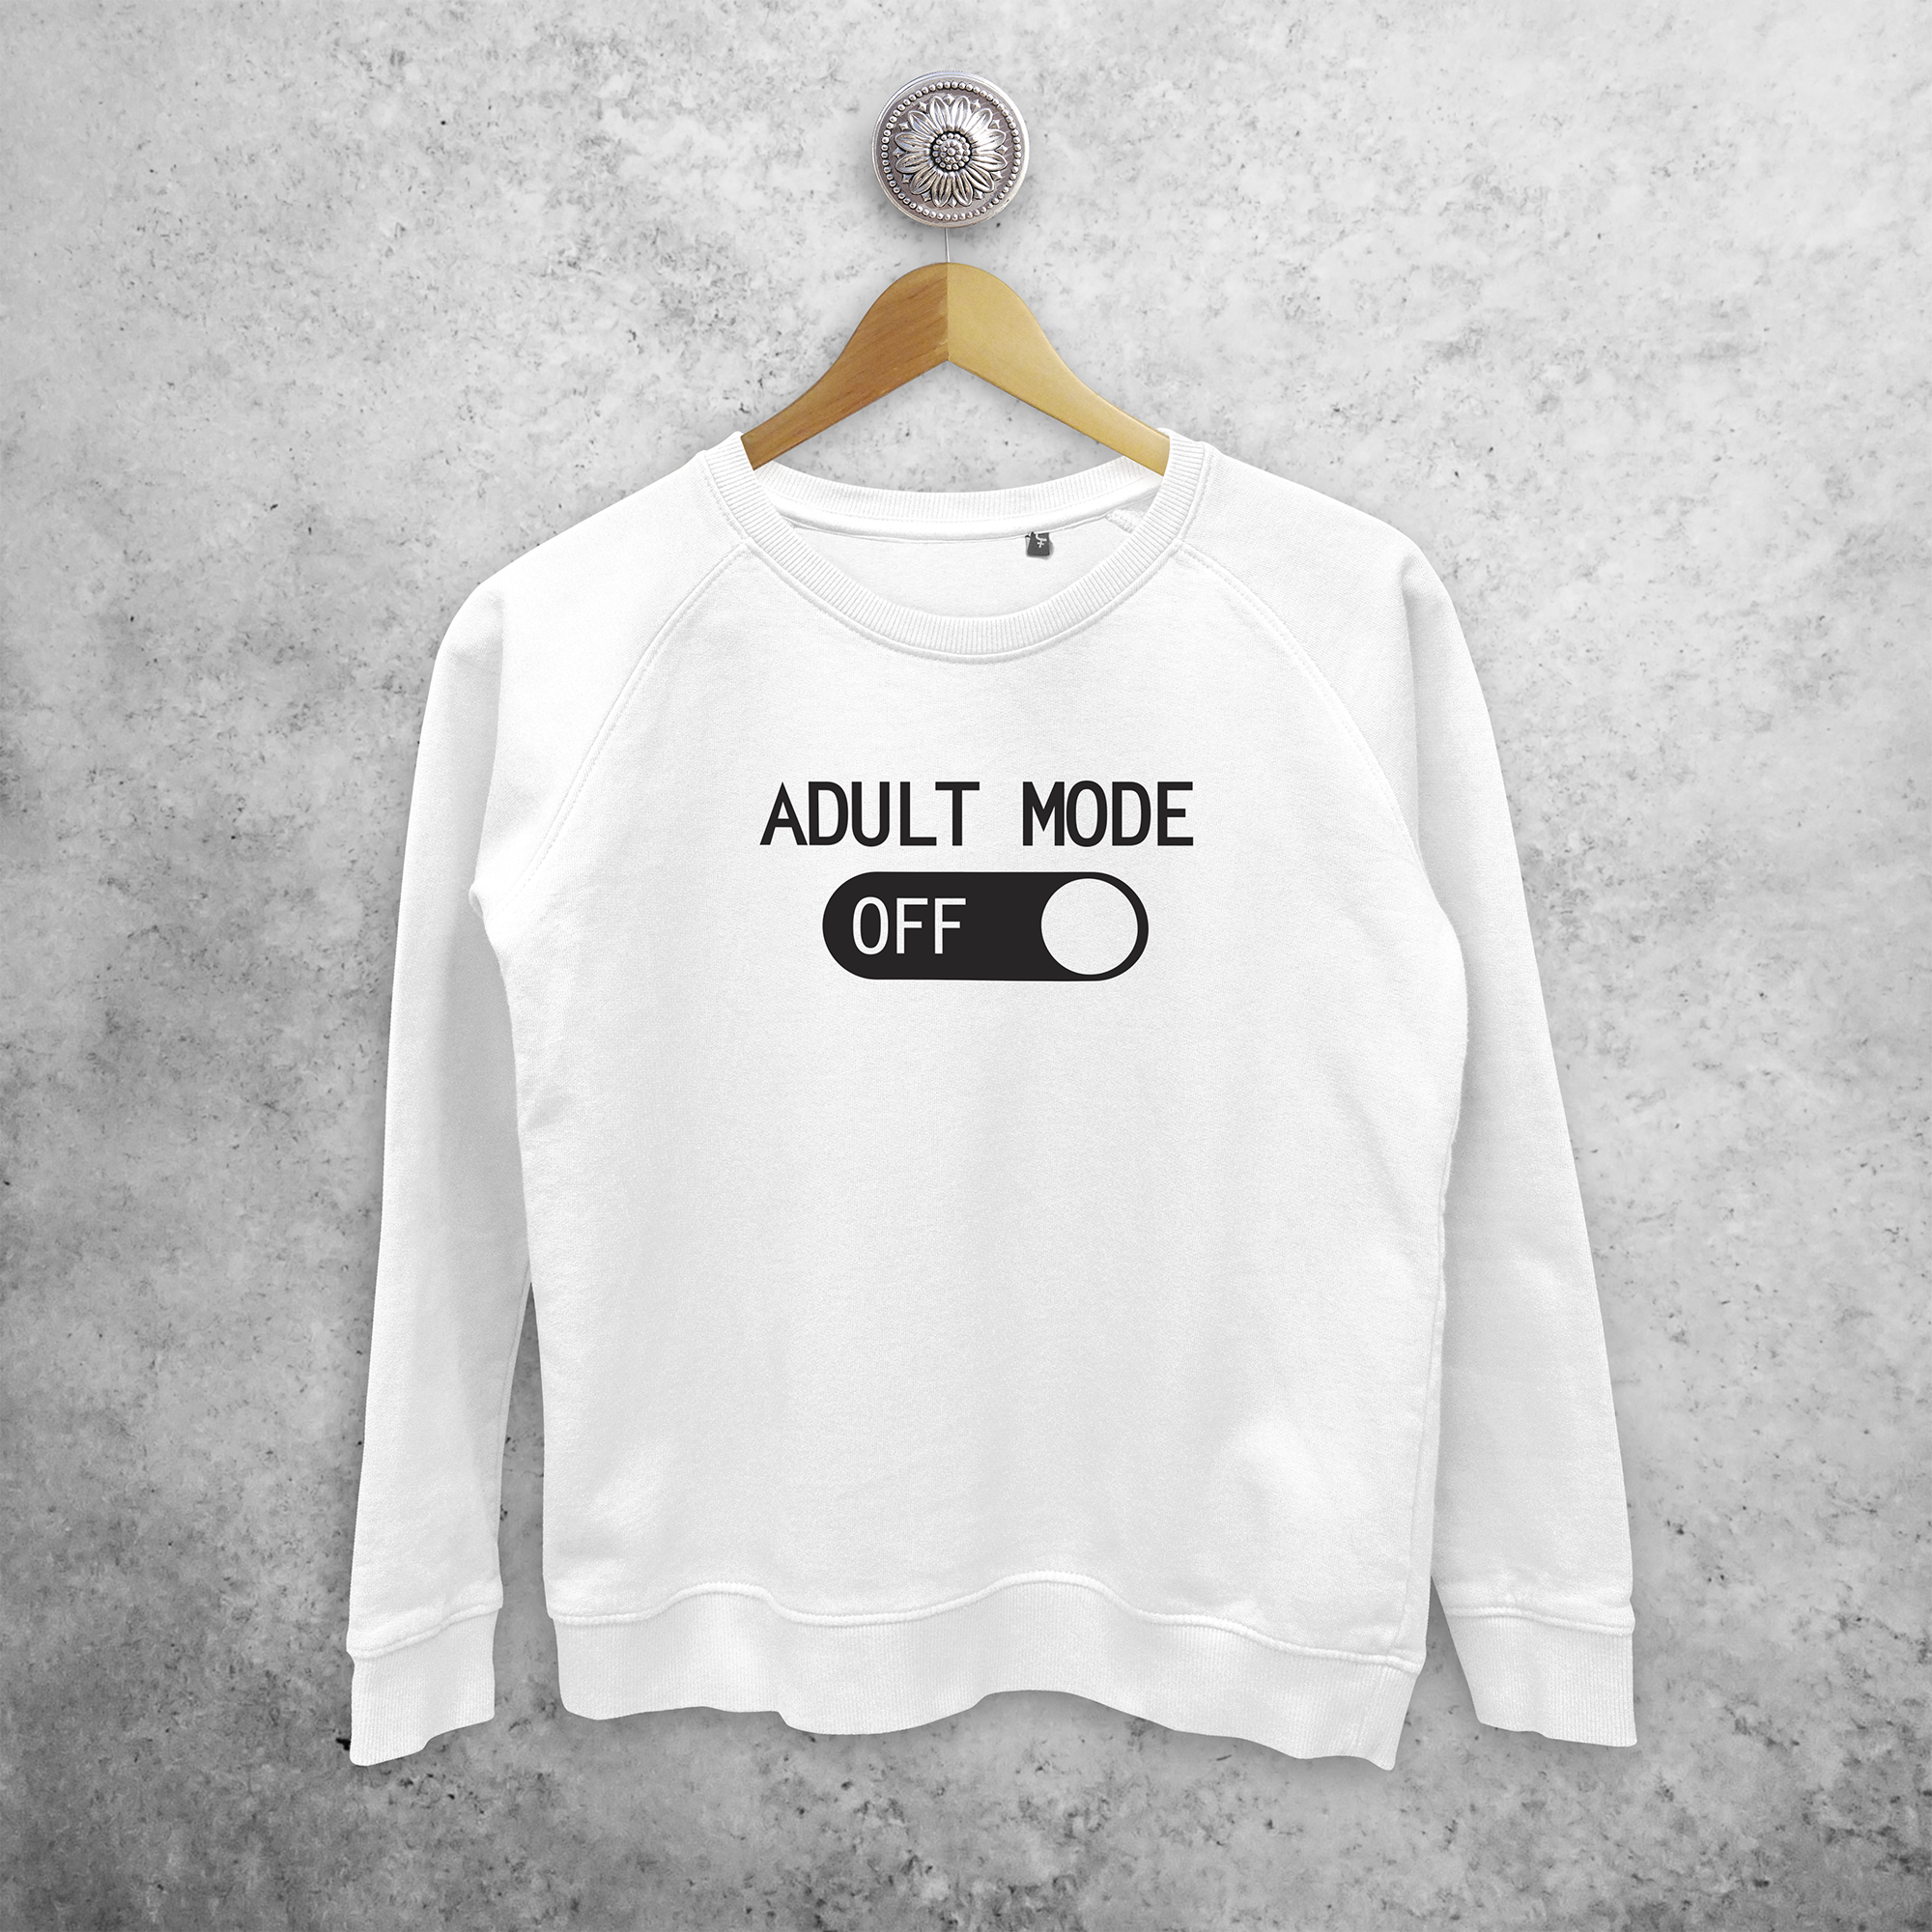 'Adult mode off' sweater